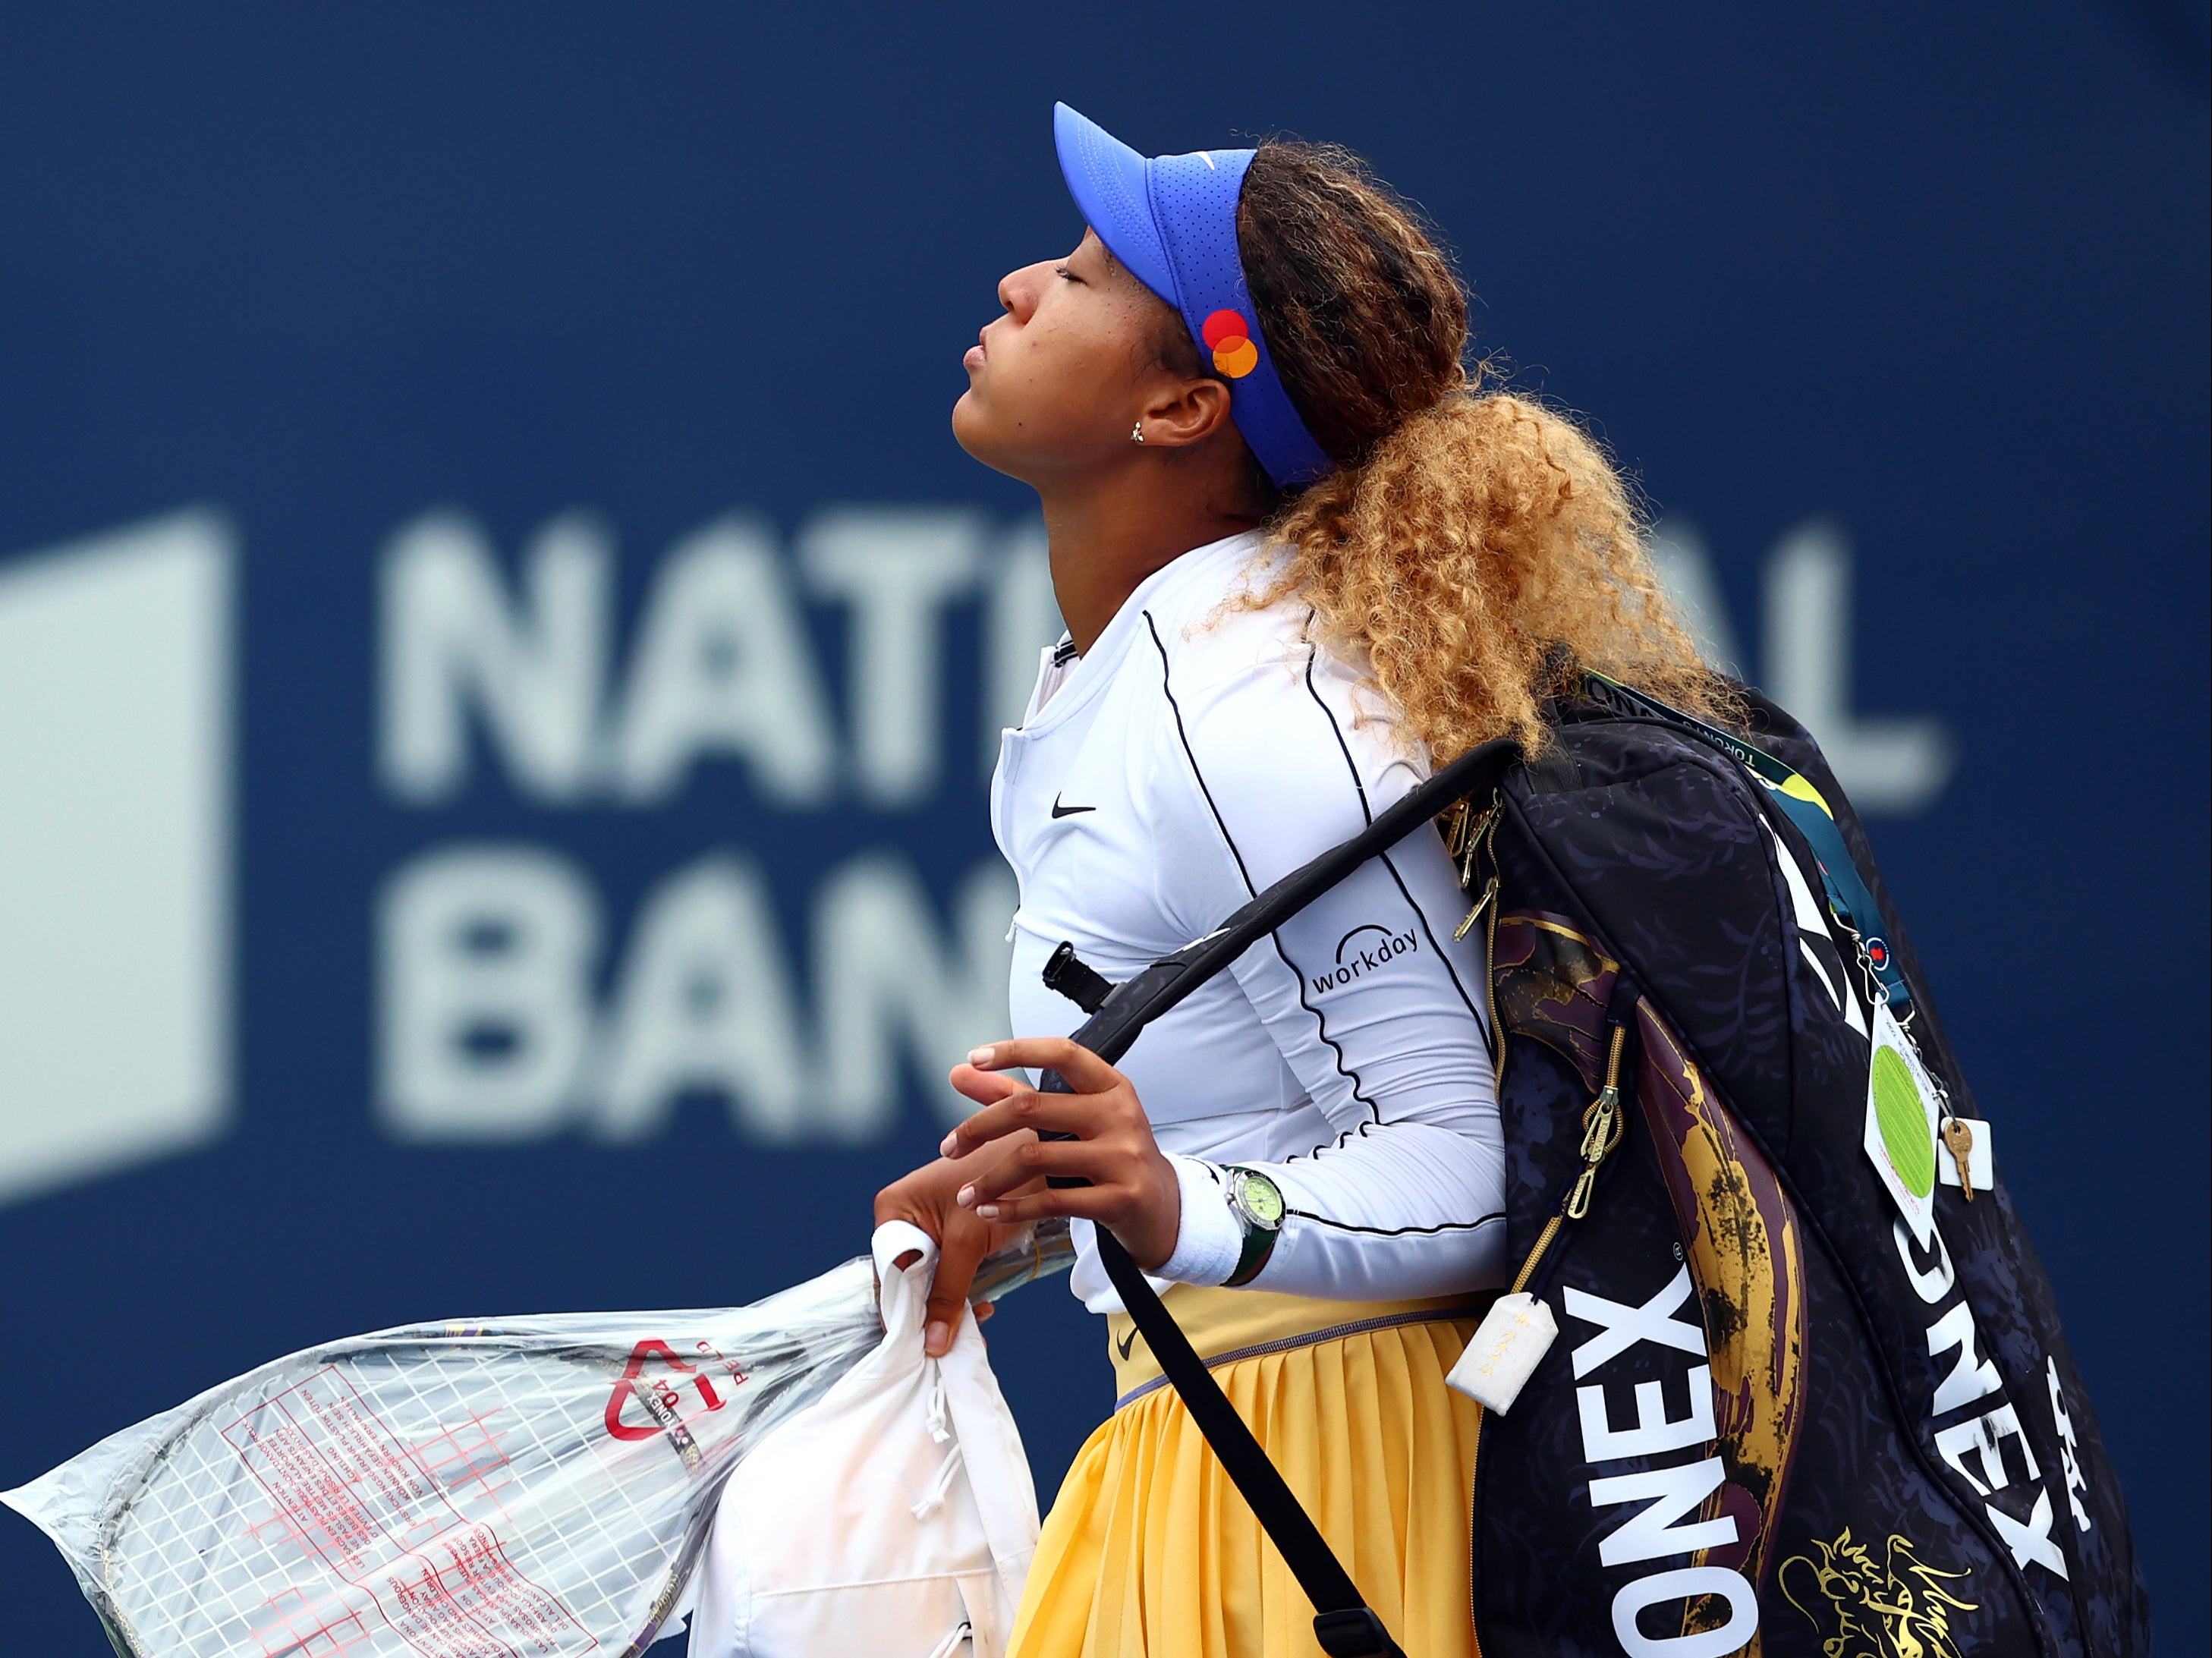 The two-time US Open champion was forced to pull out of her first round match